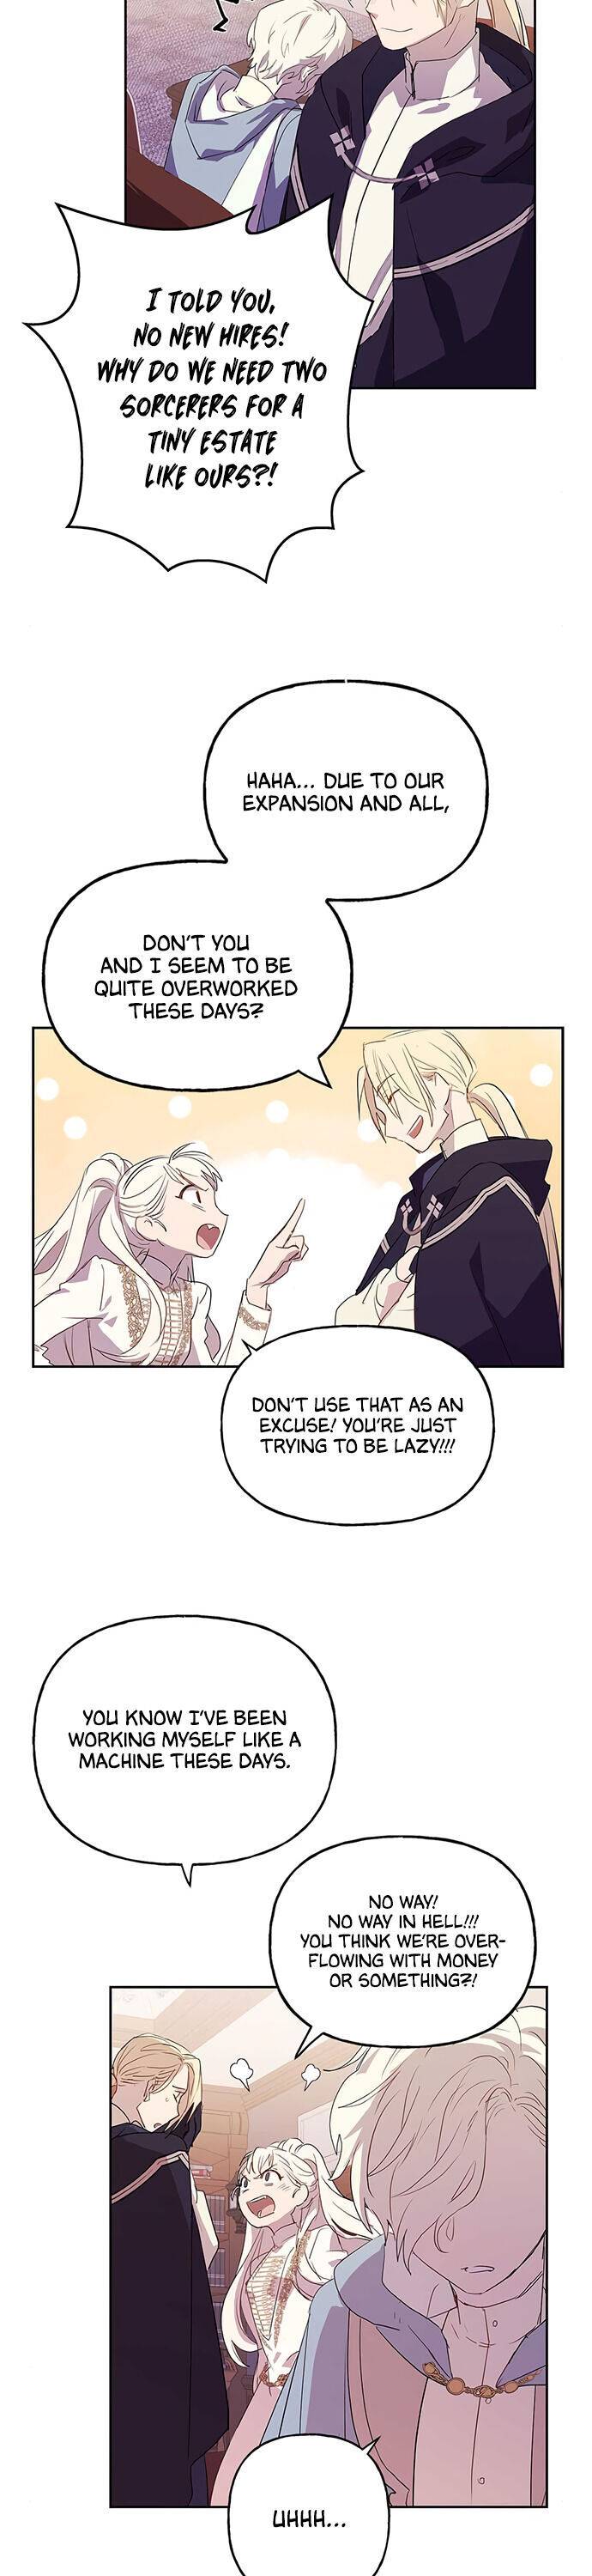 Oh, Be Patient My Lady! chapter 5